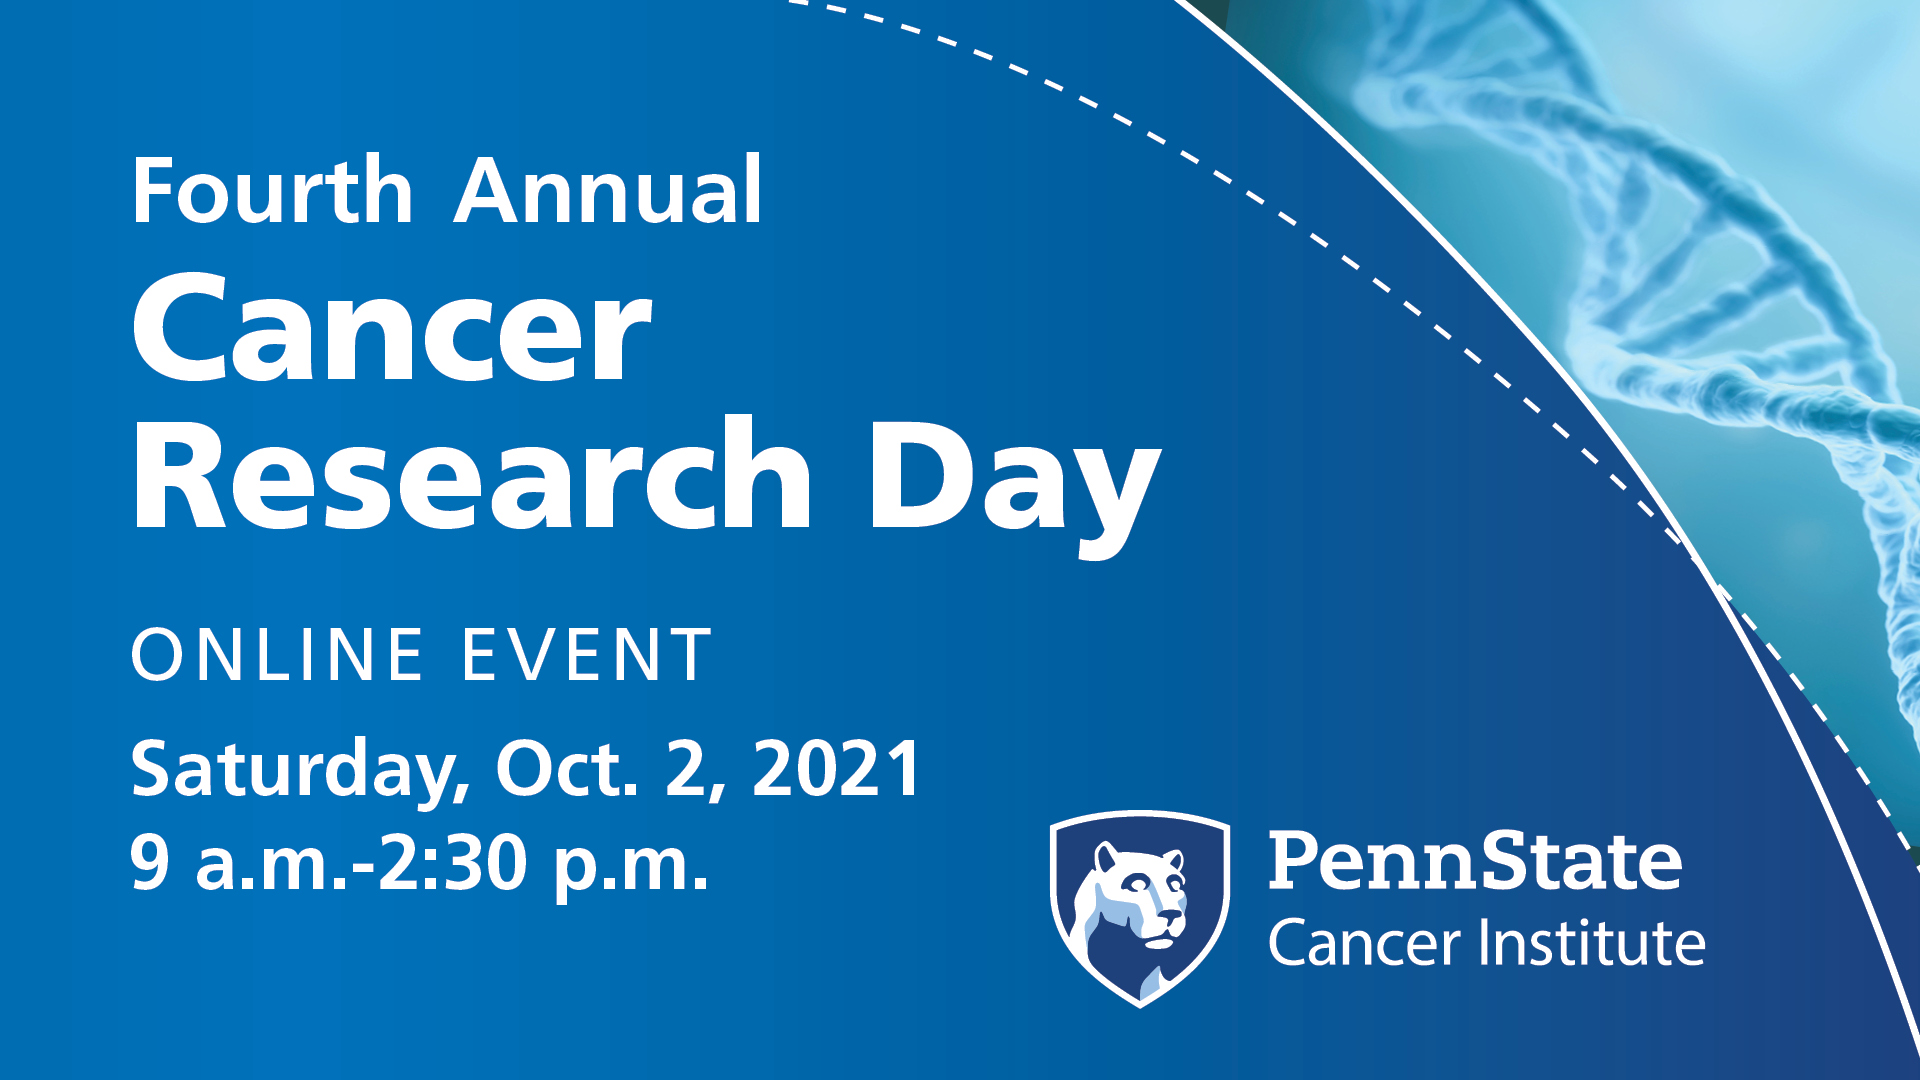 Large graphic that says fourth annual Cancer Research Day is an online event happening on Saturday, Oct. 2 from 9 a.m. to 2:30 p.m. sponsored by the Penn State Cancer Institute